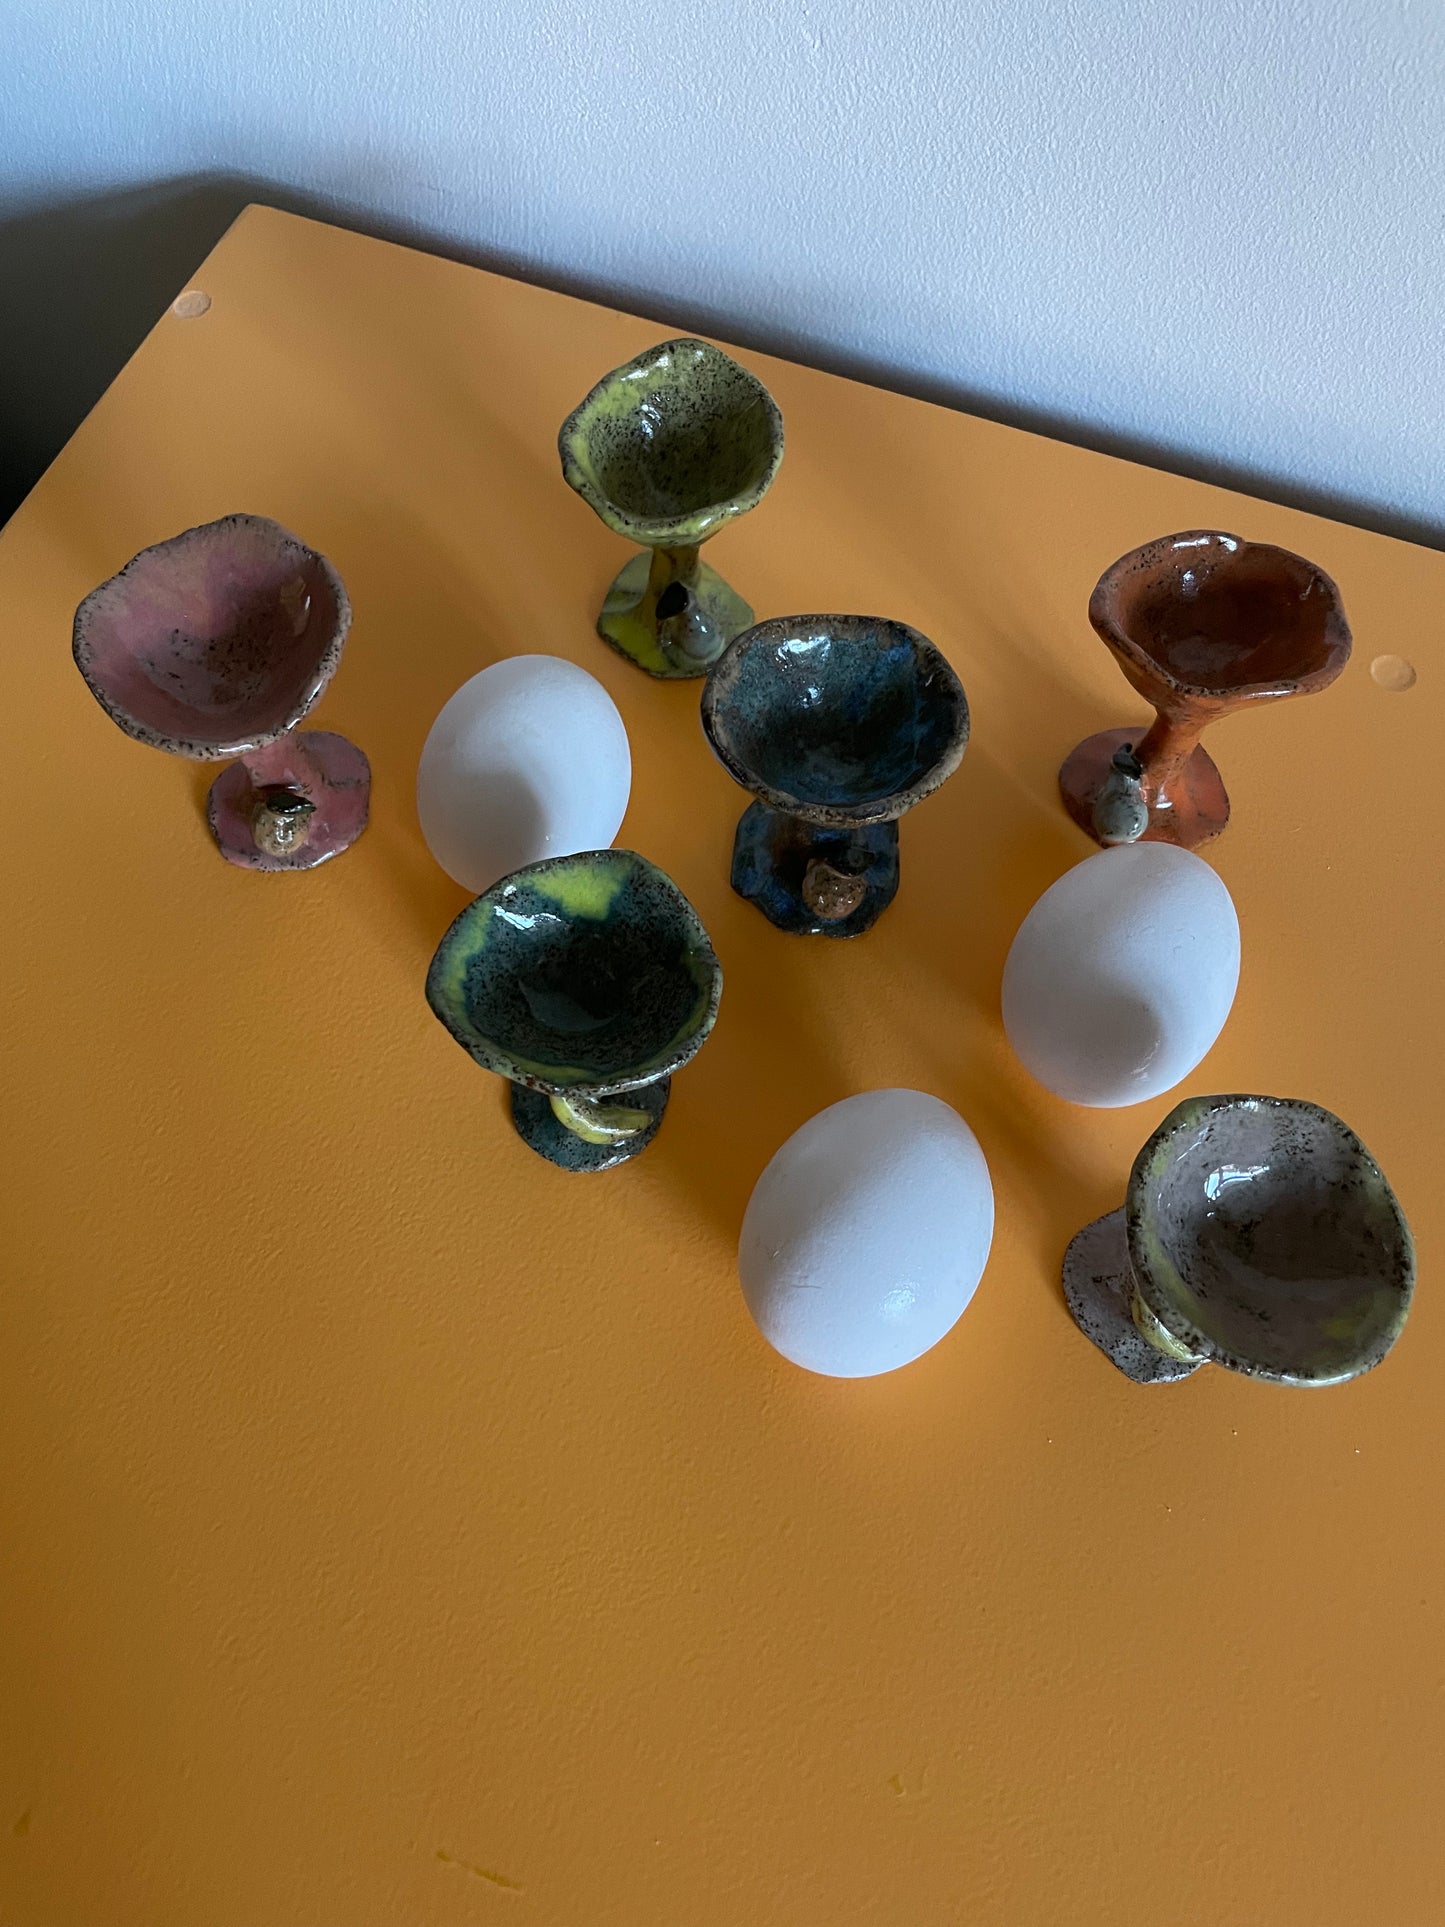 Colored ceramic - 6 egg cups with fruits